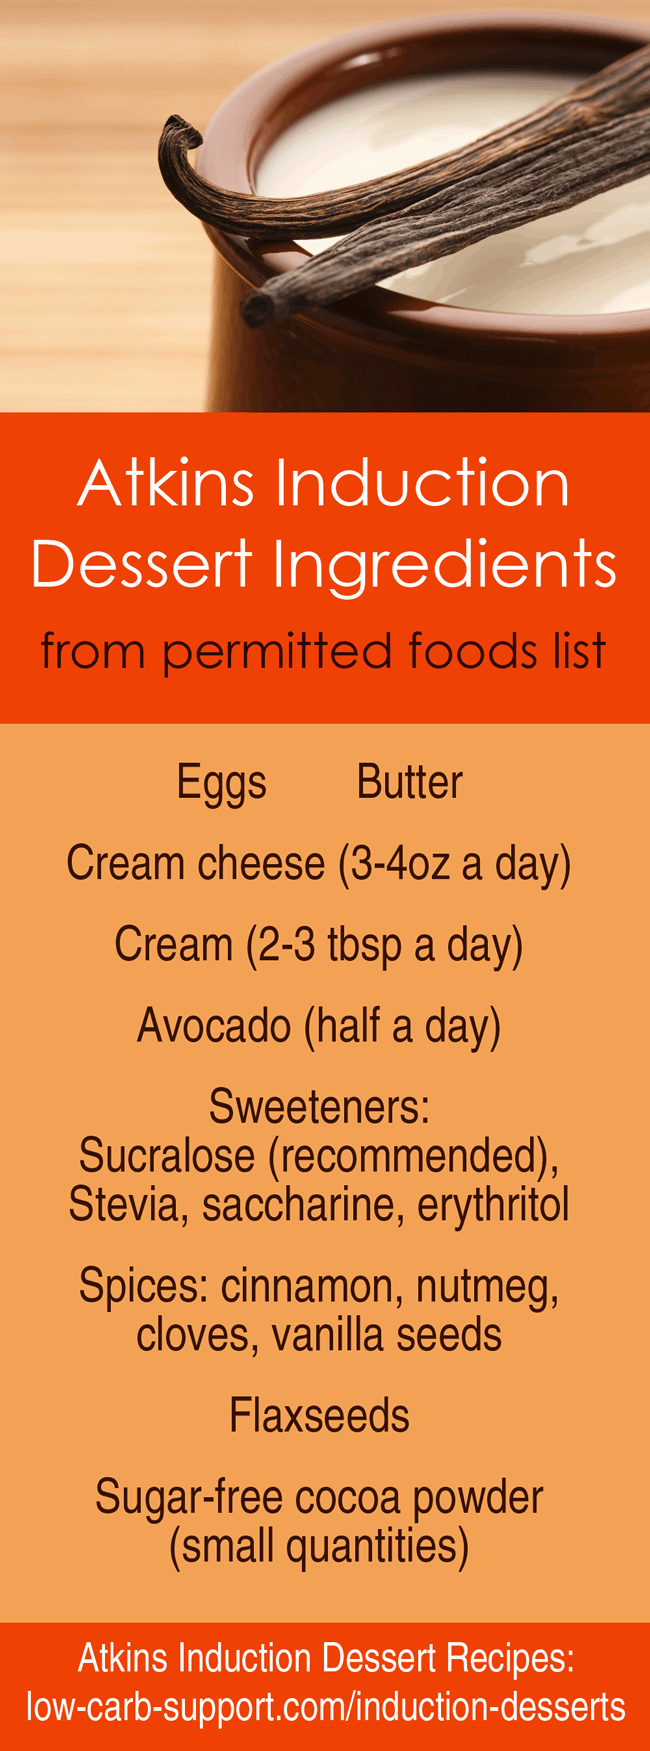 what is a good dessert for atkins diet